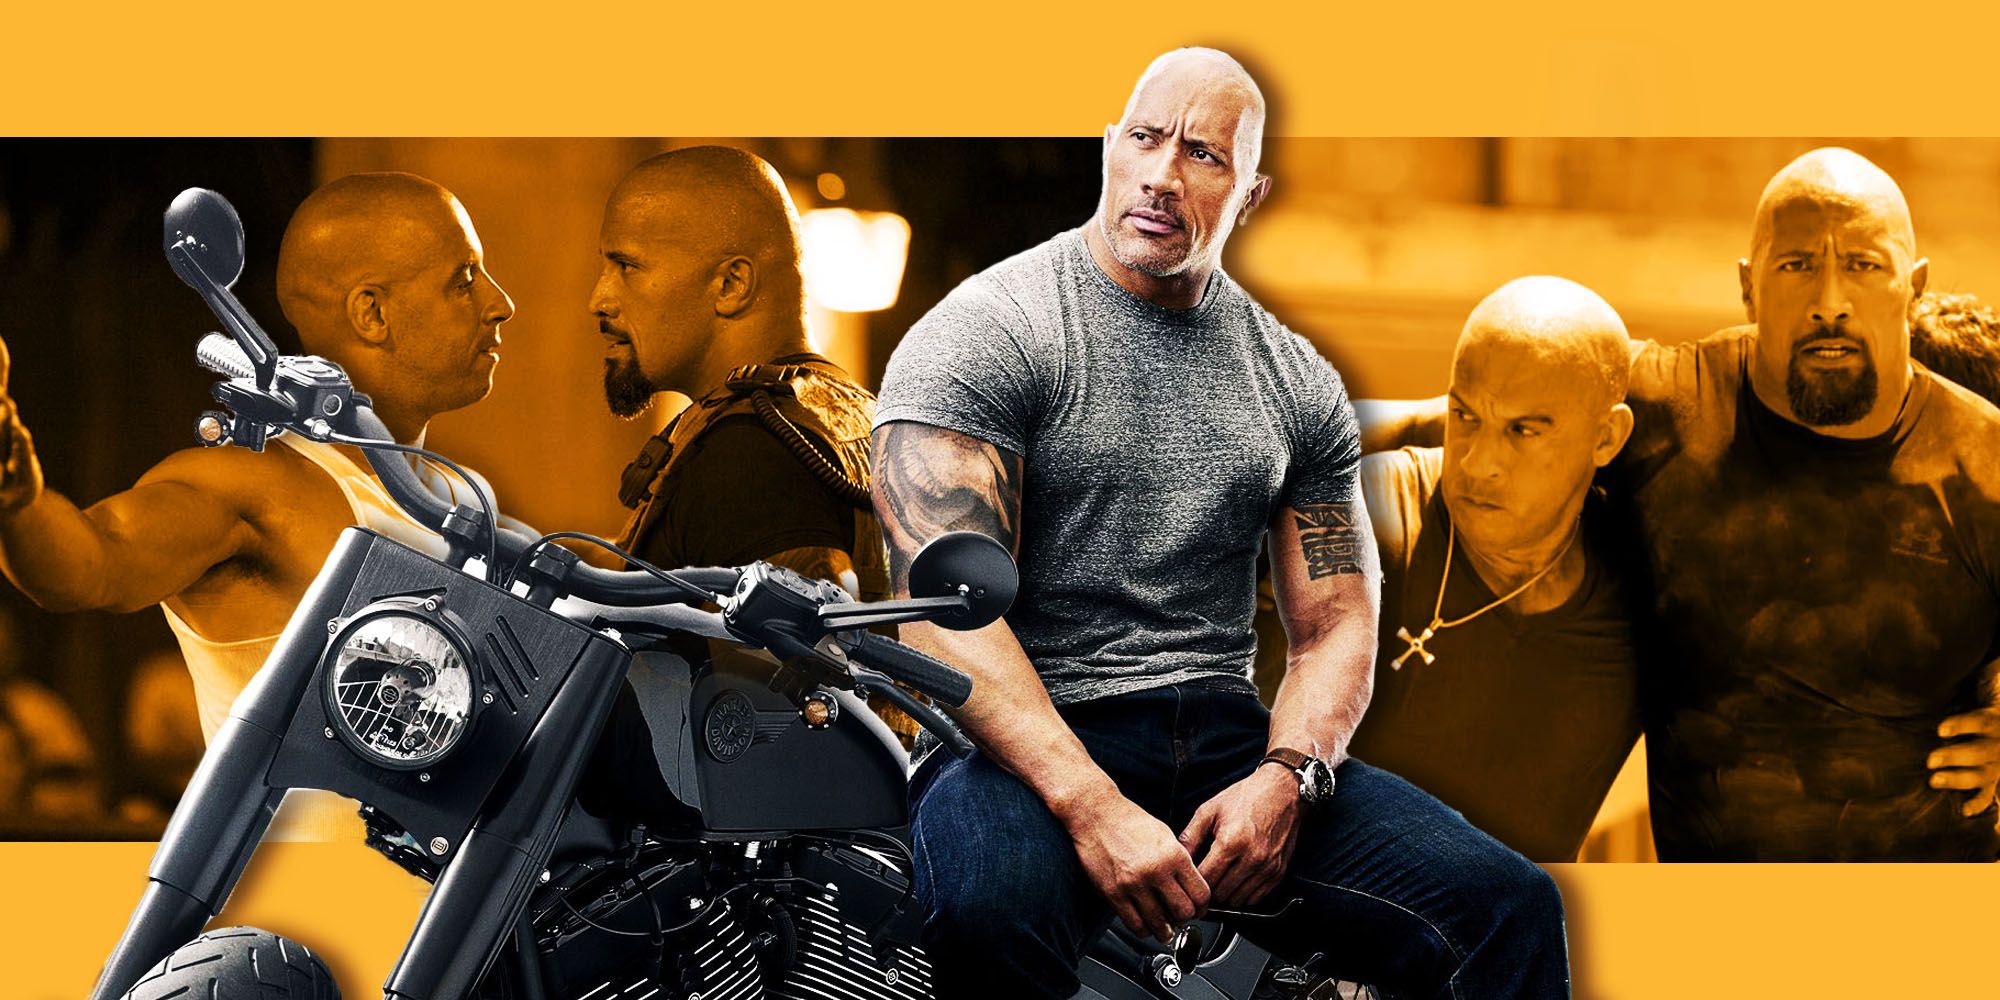 The Rock Is Back! But Fast 11 Has To Avoid Repeating A Big Franchise Mistake